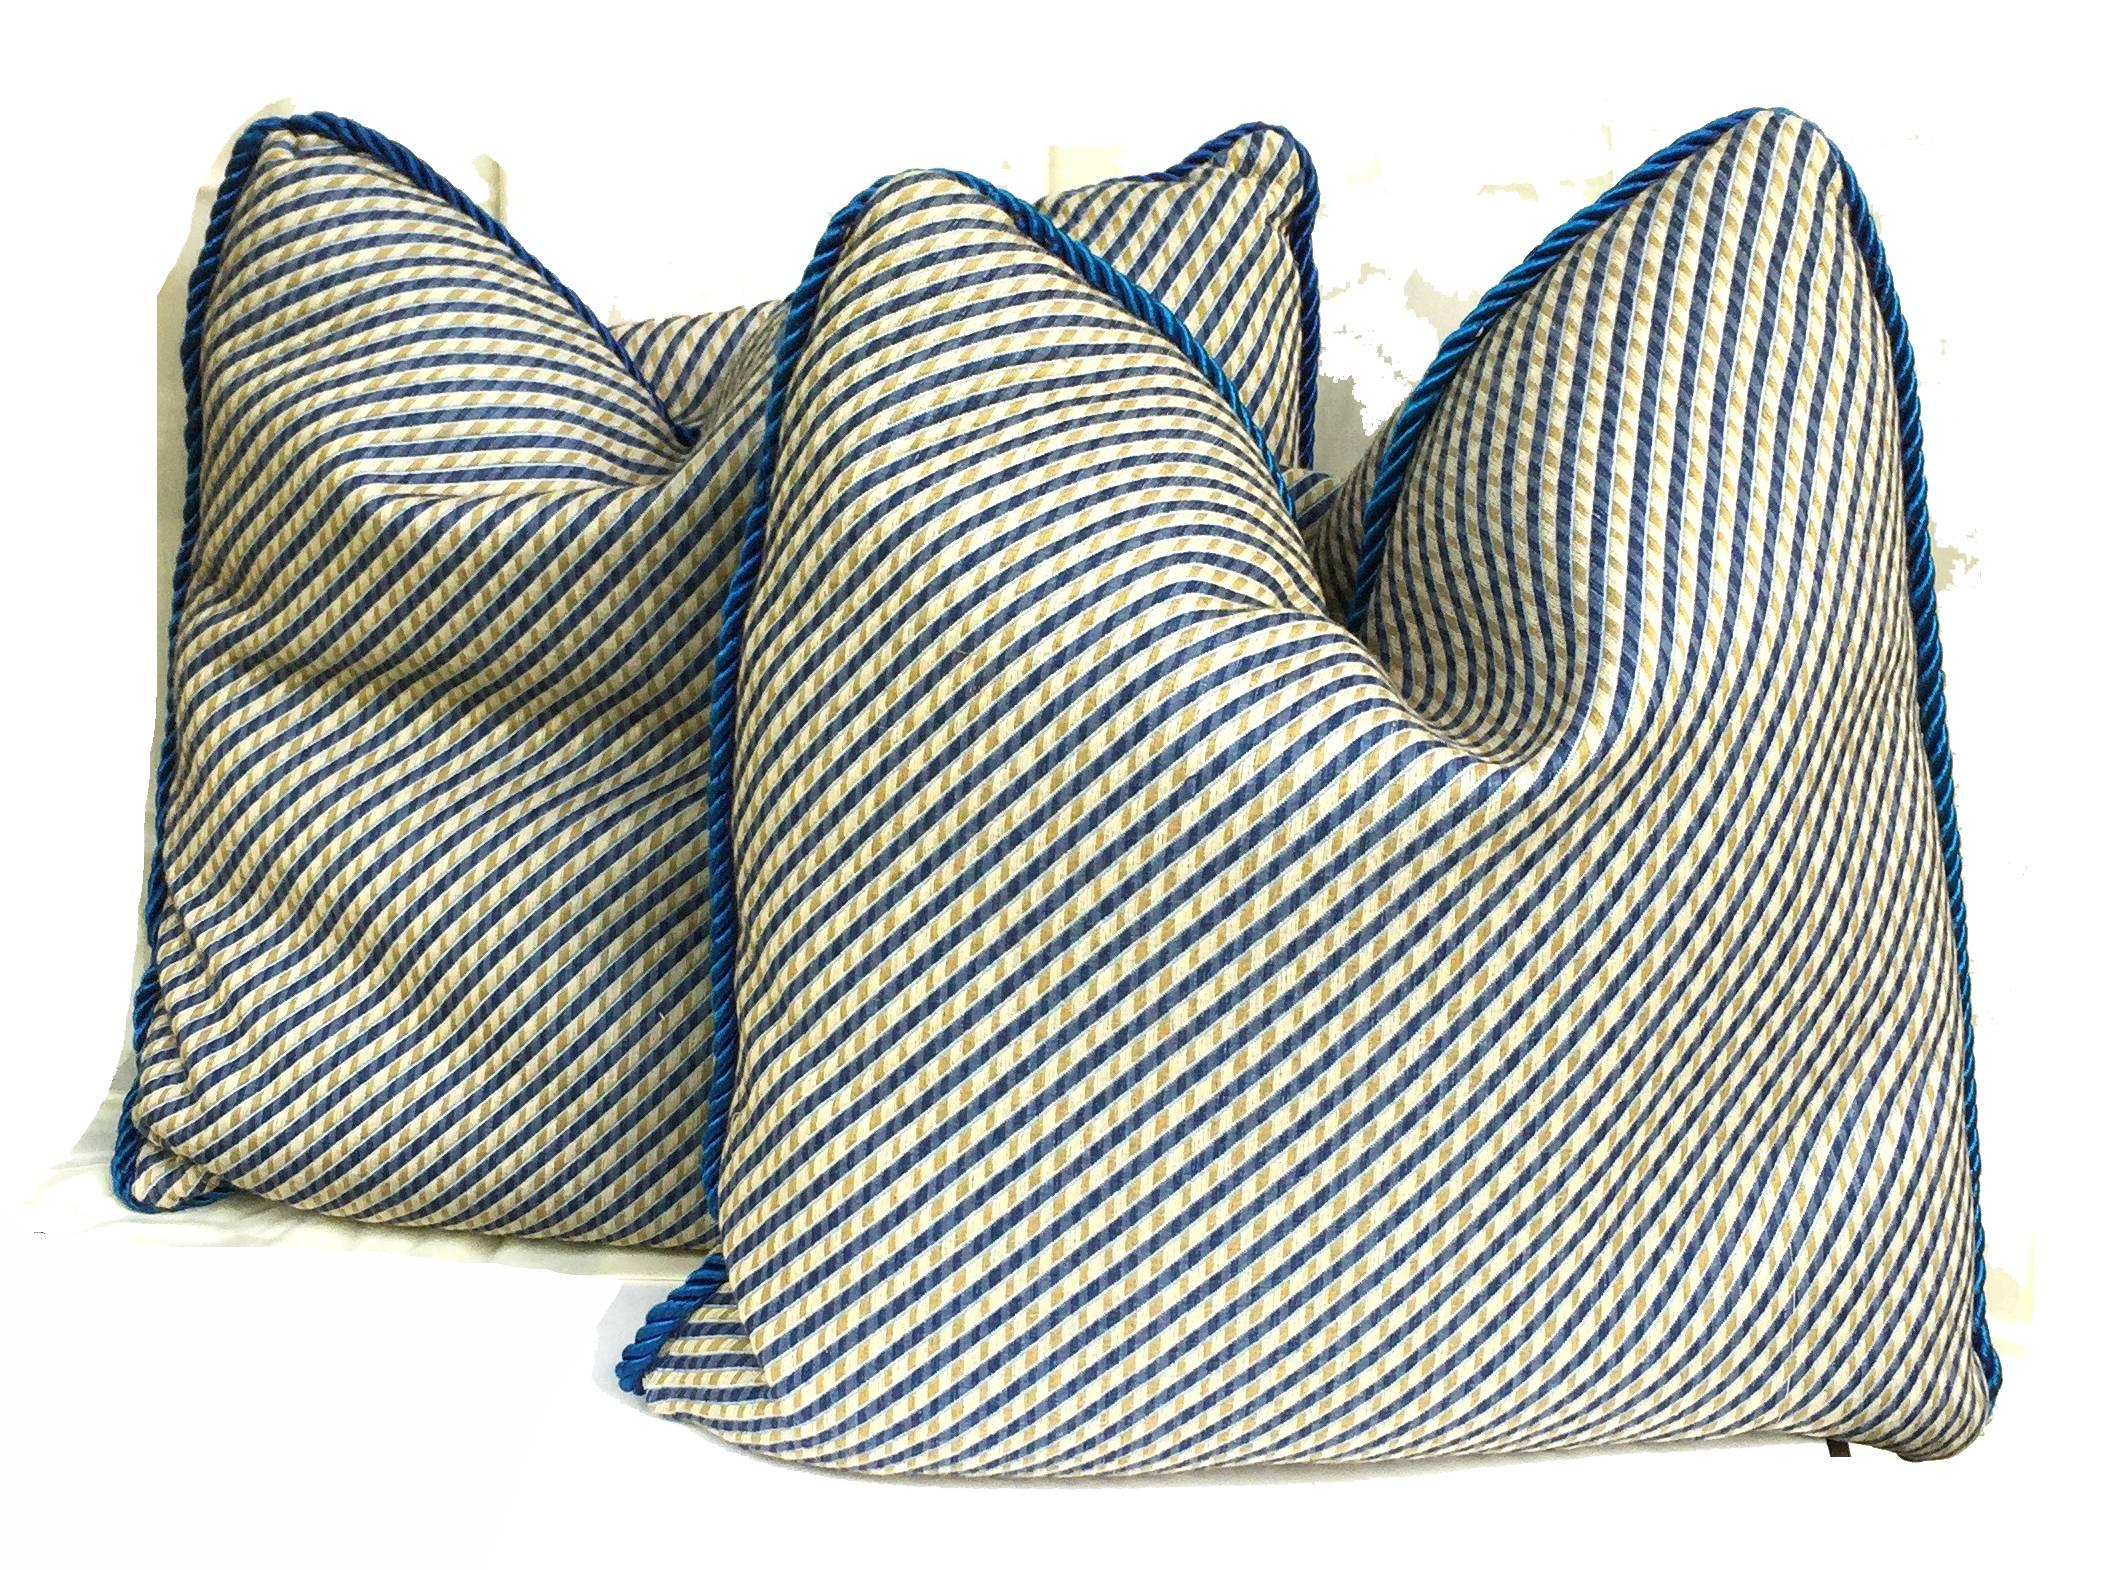 Vibrant pair of accent pillows with down fill, the front and back with diagonal patterning in Chinese yellow - ocher and blue, heavy-weight cotton fabric, the edges with peacock blue silk rope-twist trim, 3/4